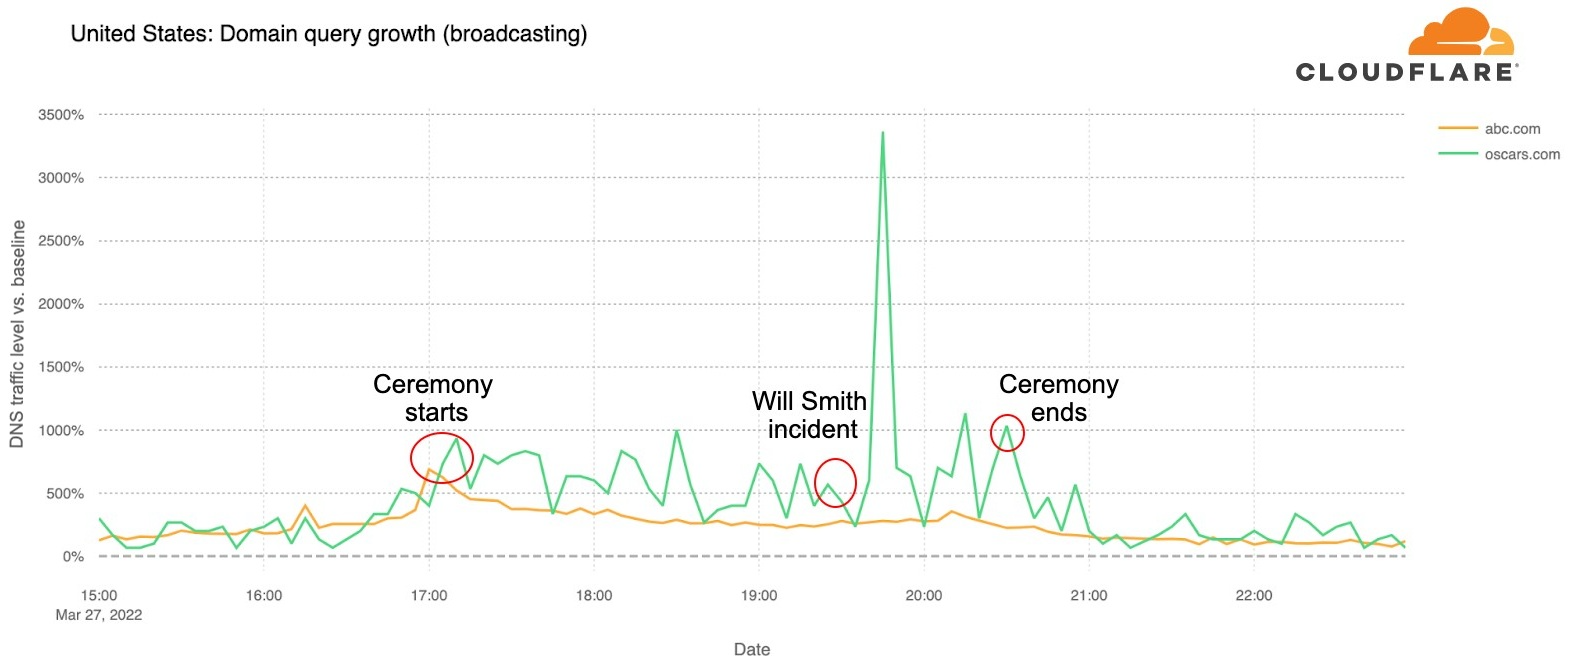 Chart of ABC.com and Oscars.com DNS traffic growth with spikes when the ceremony started, after the Will Smith incident and when the ceremony ended.